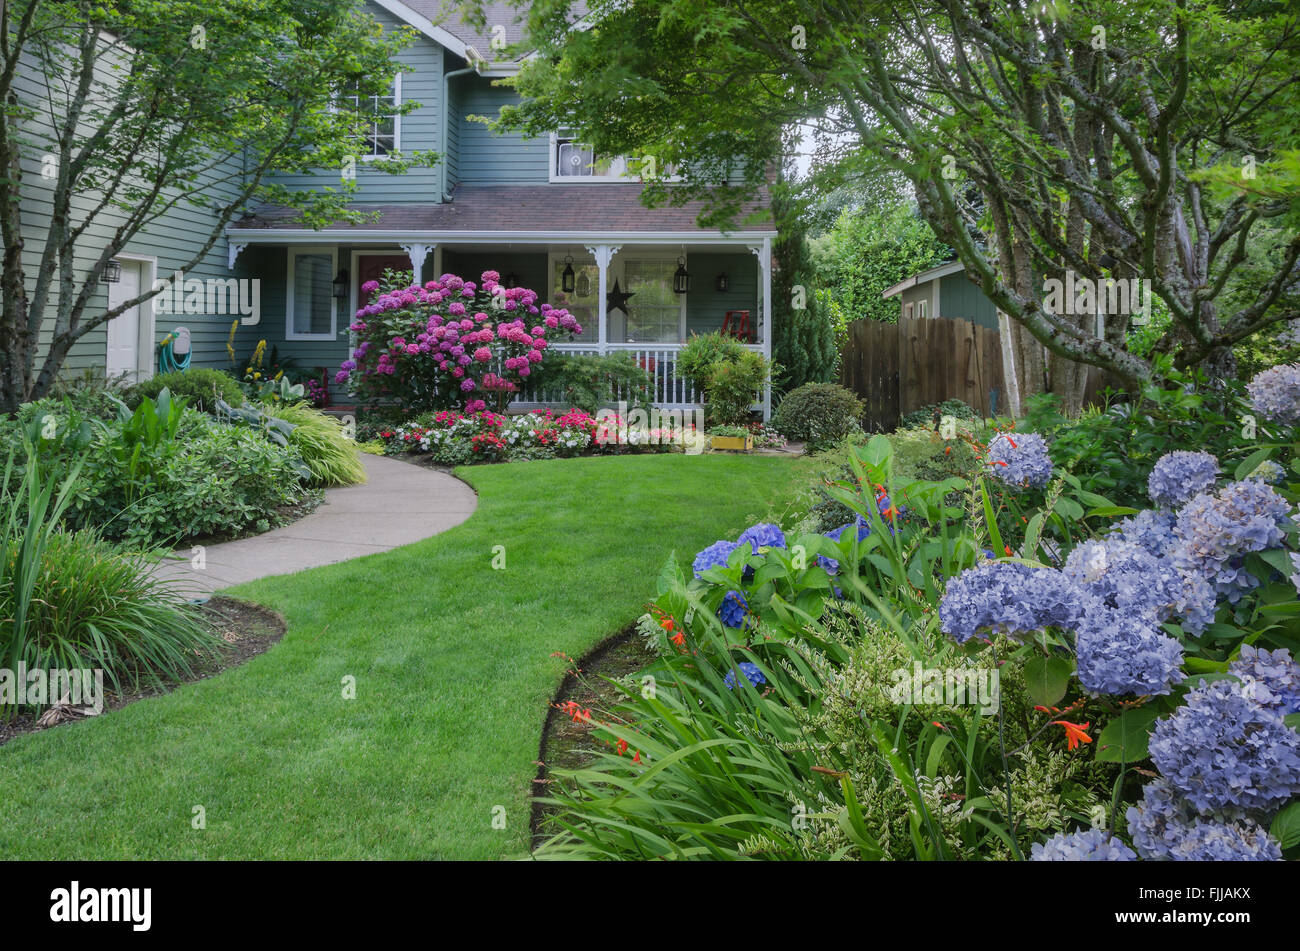 Entrance to a home through a beautiful garden, highlighted by rose and blue hydrangeas. Stock Photo